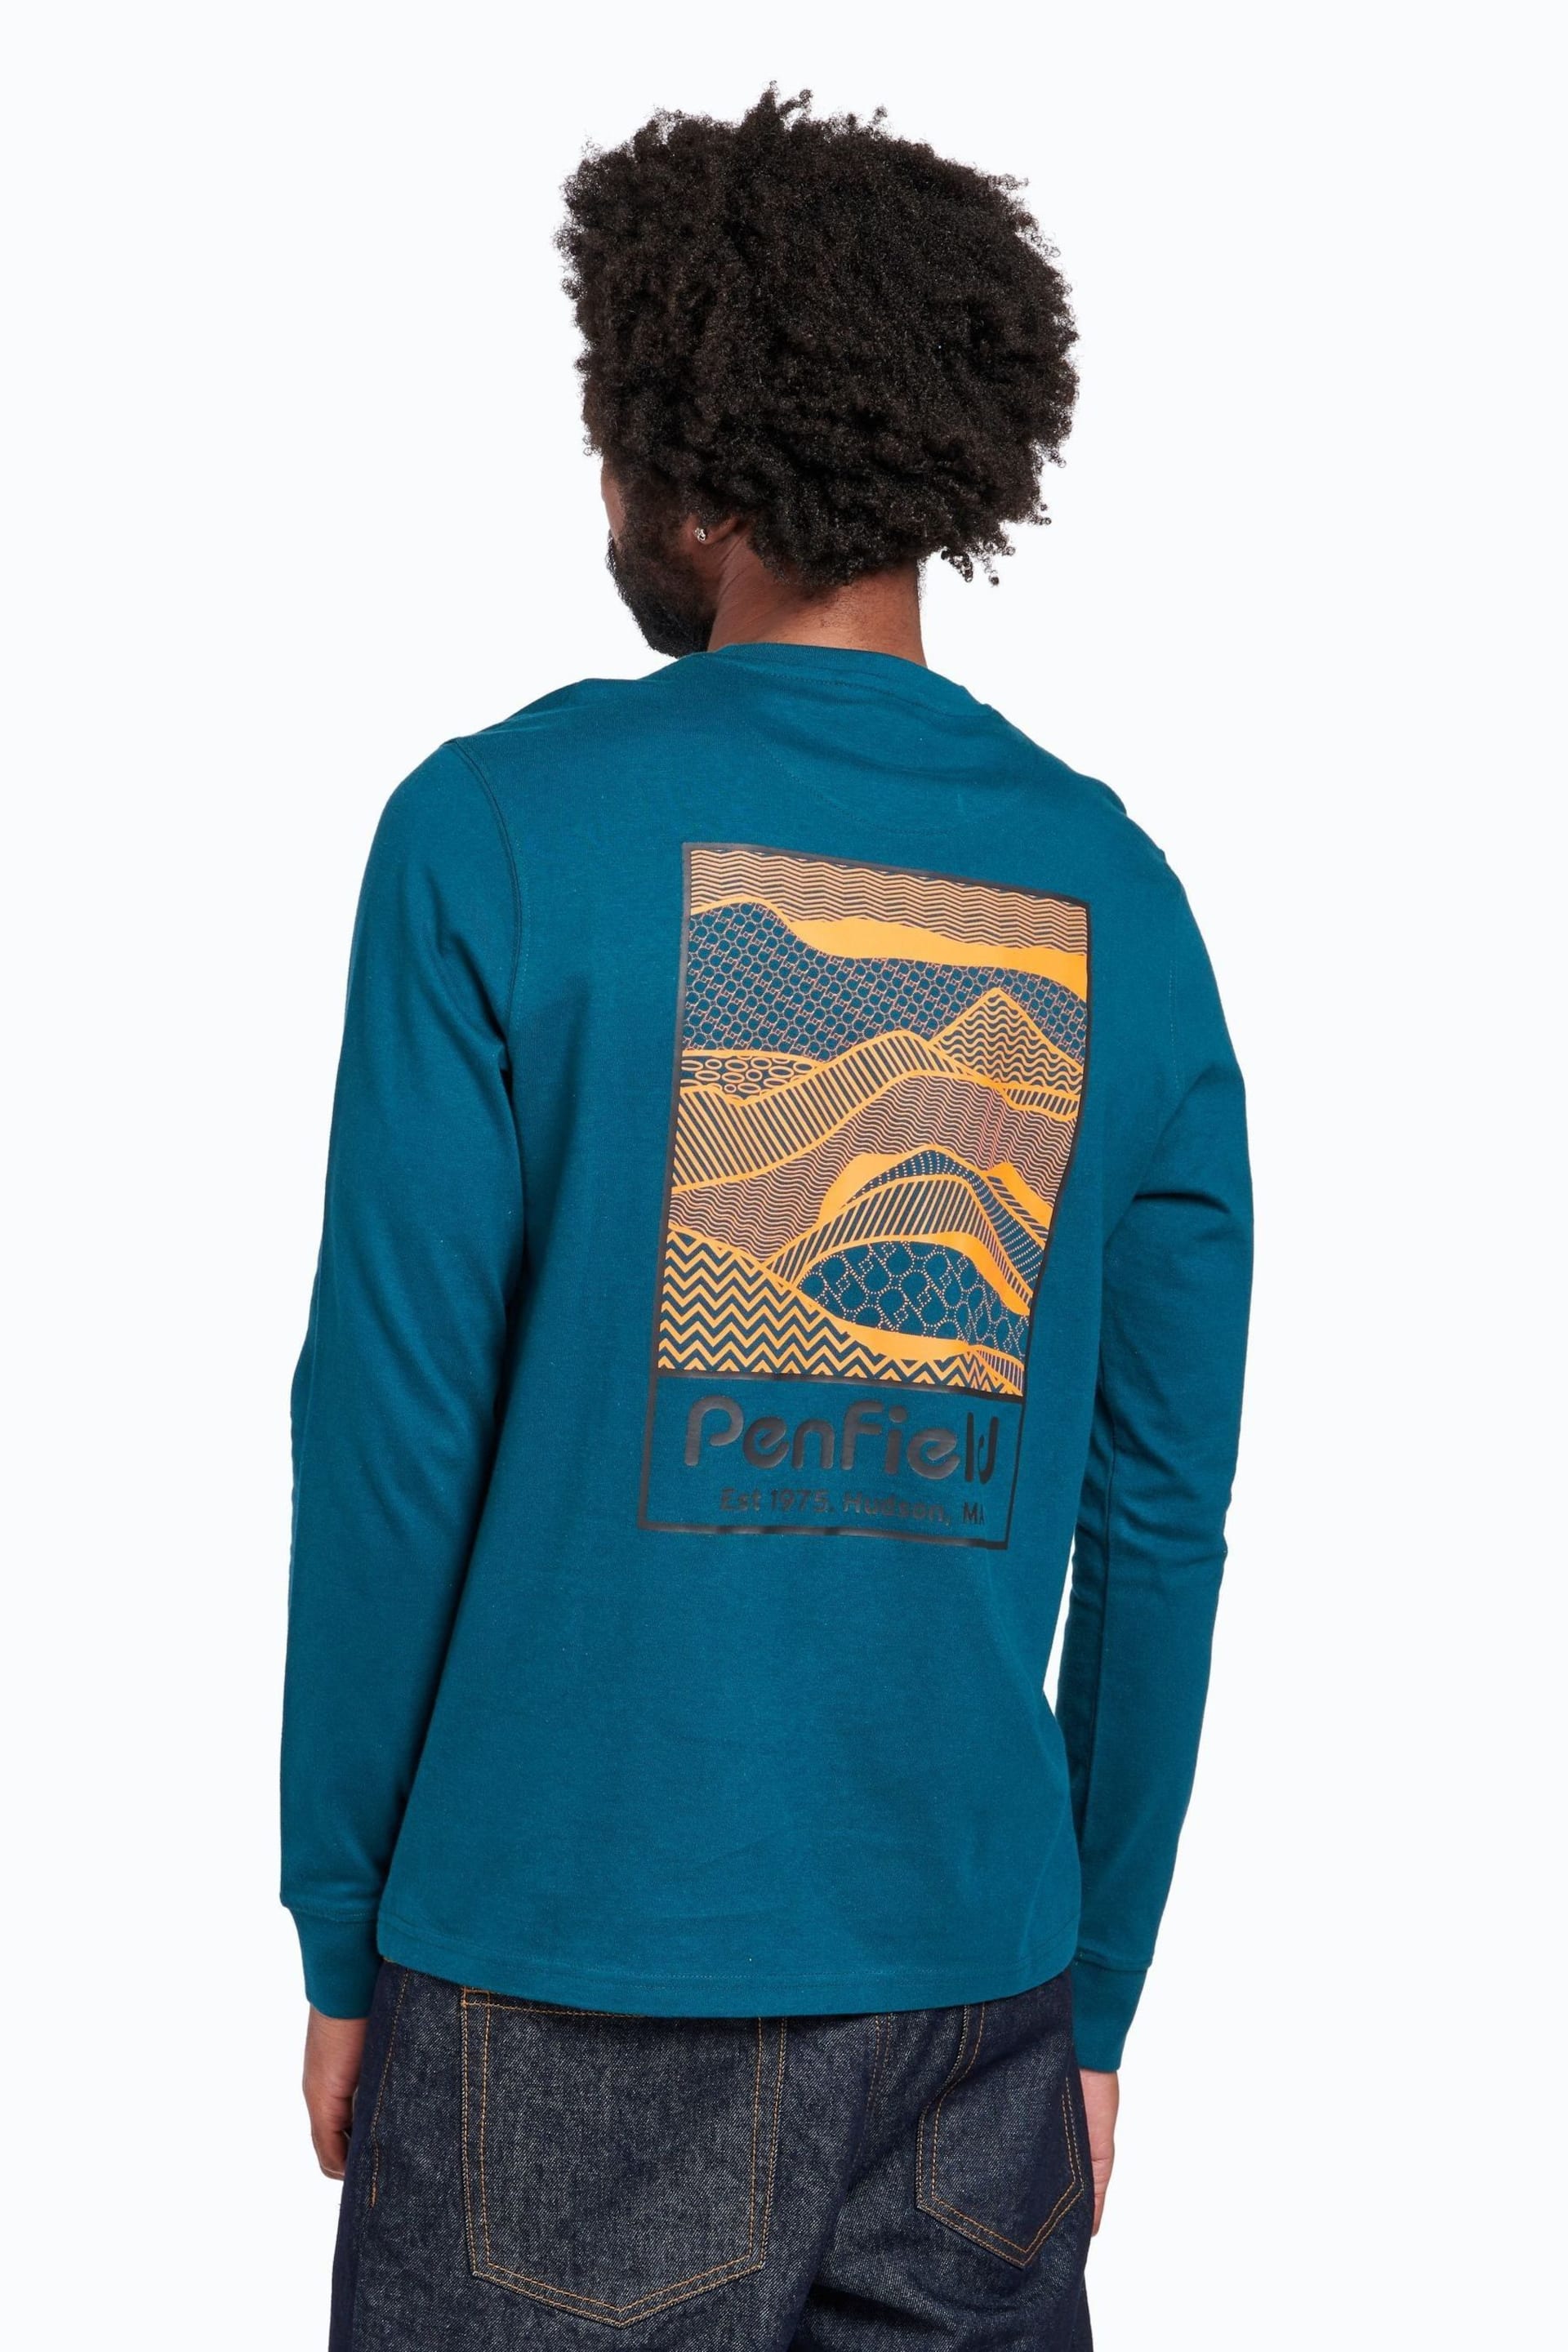 Penfield Blue Sketch Mountain Back Graphic Long-Sleeved T-Shirt - Image 2 of 7